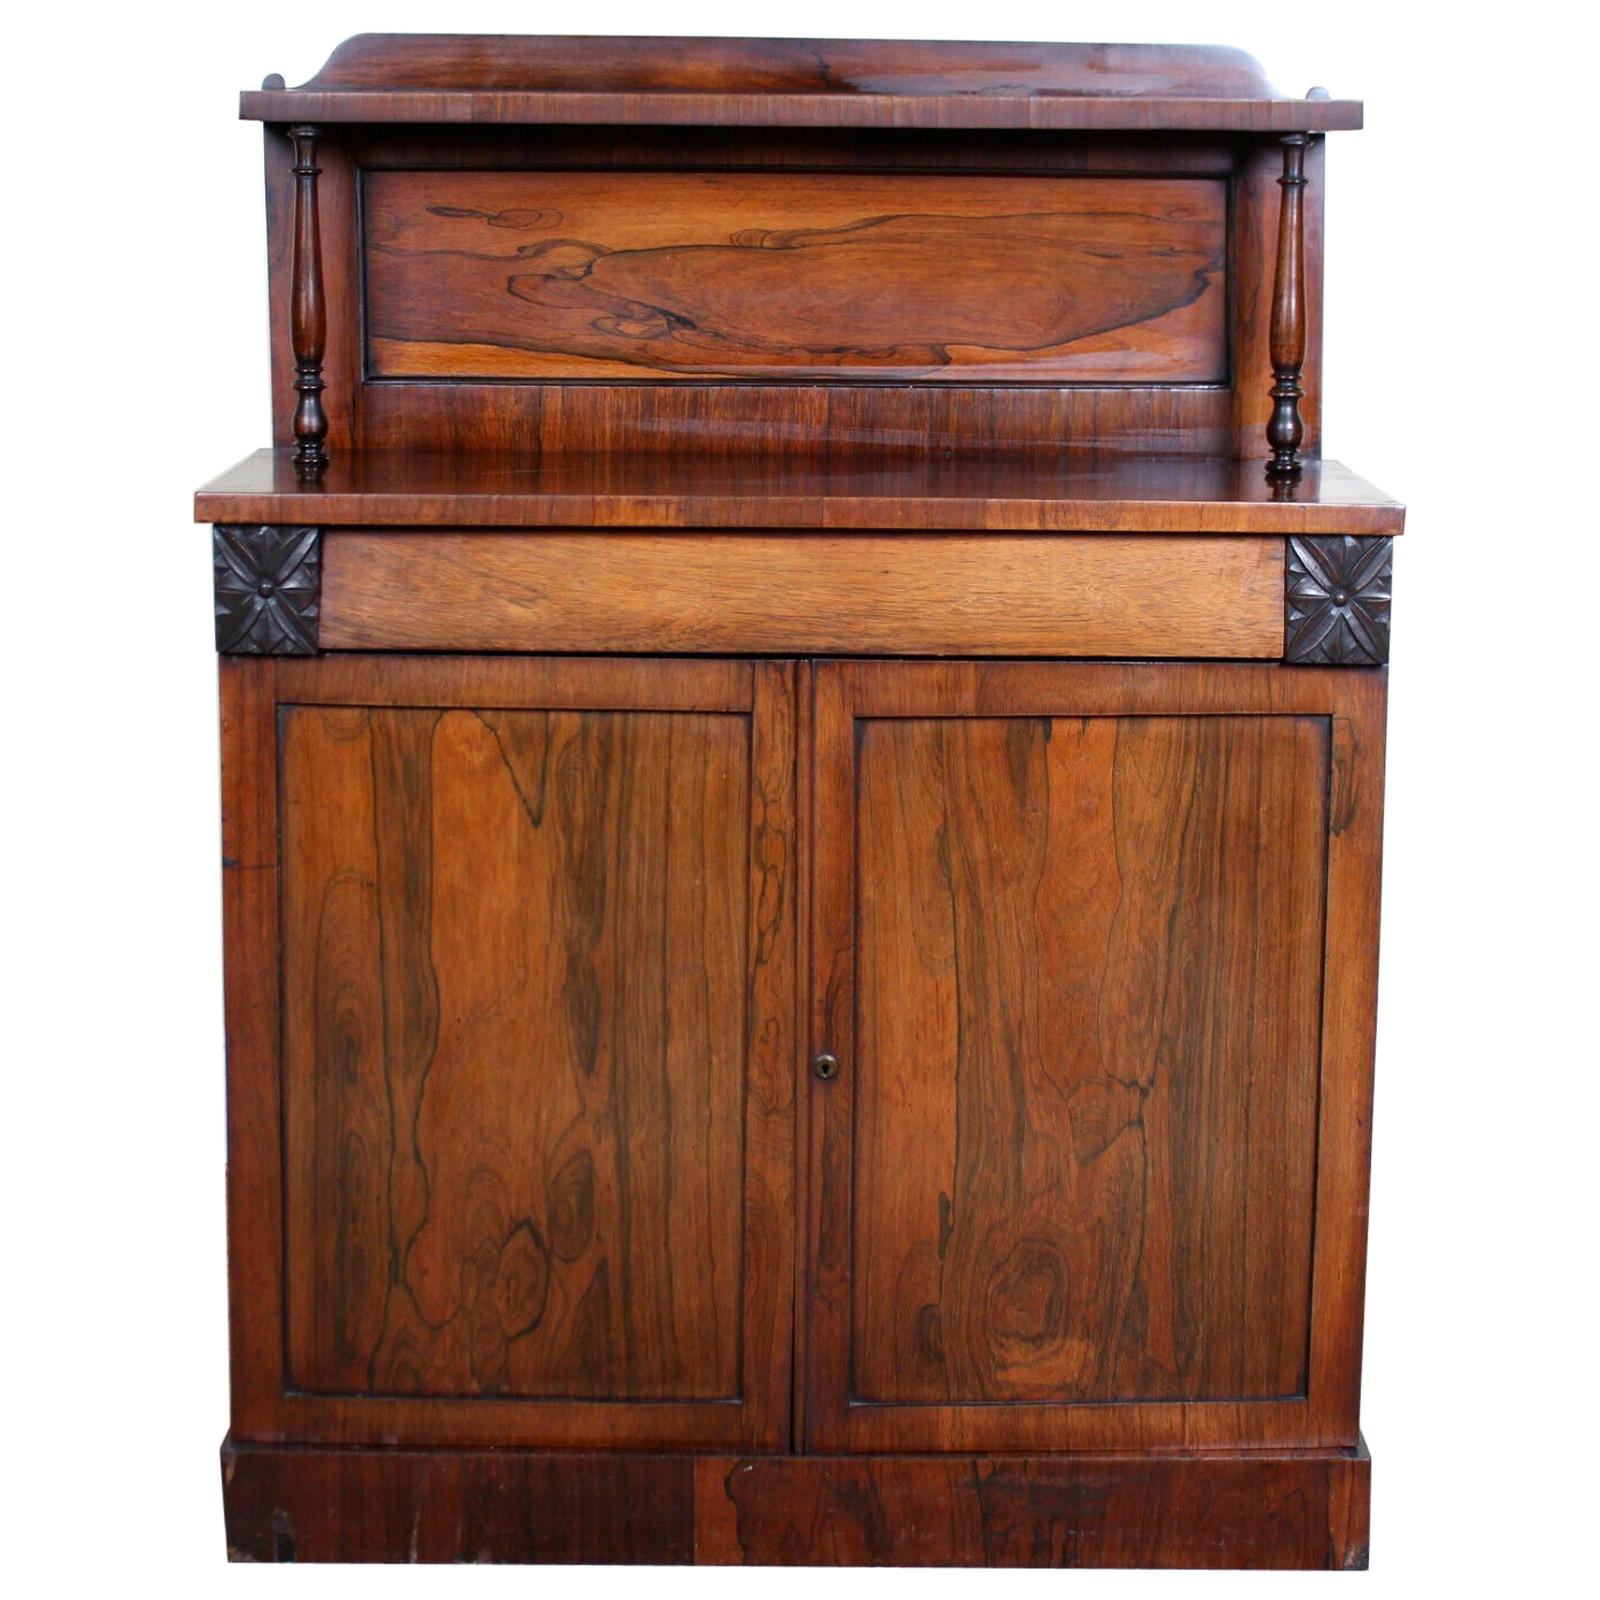 English Rosewood Chiffonier Petite Sideboard Victorian, 19th Century For Sale